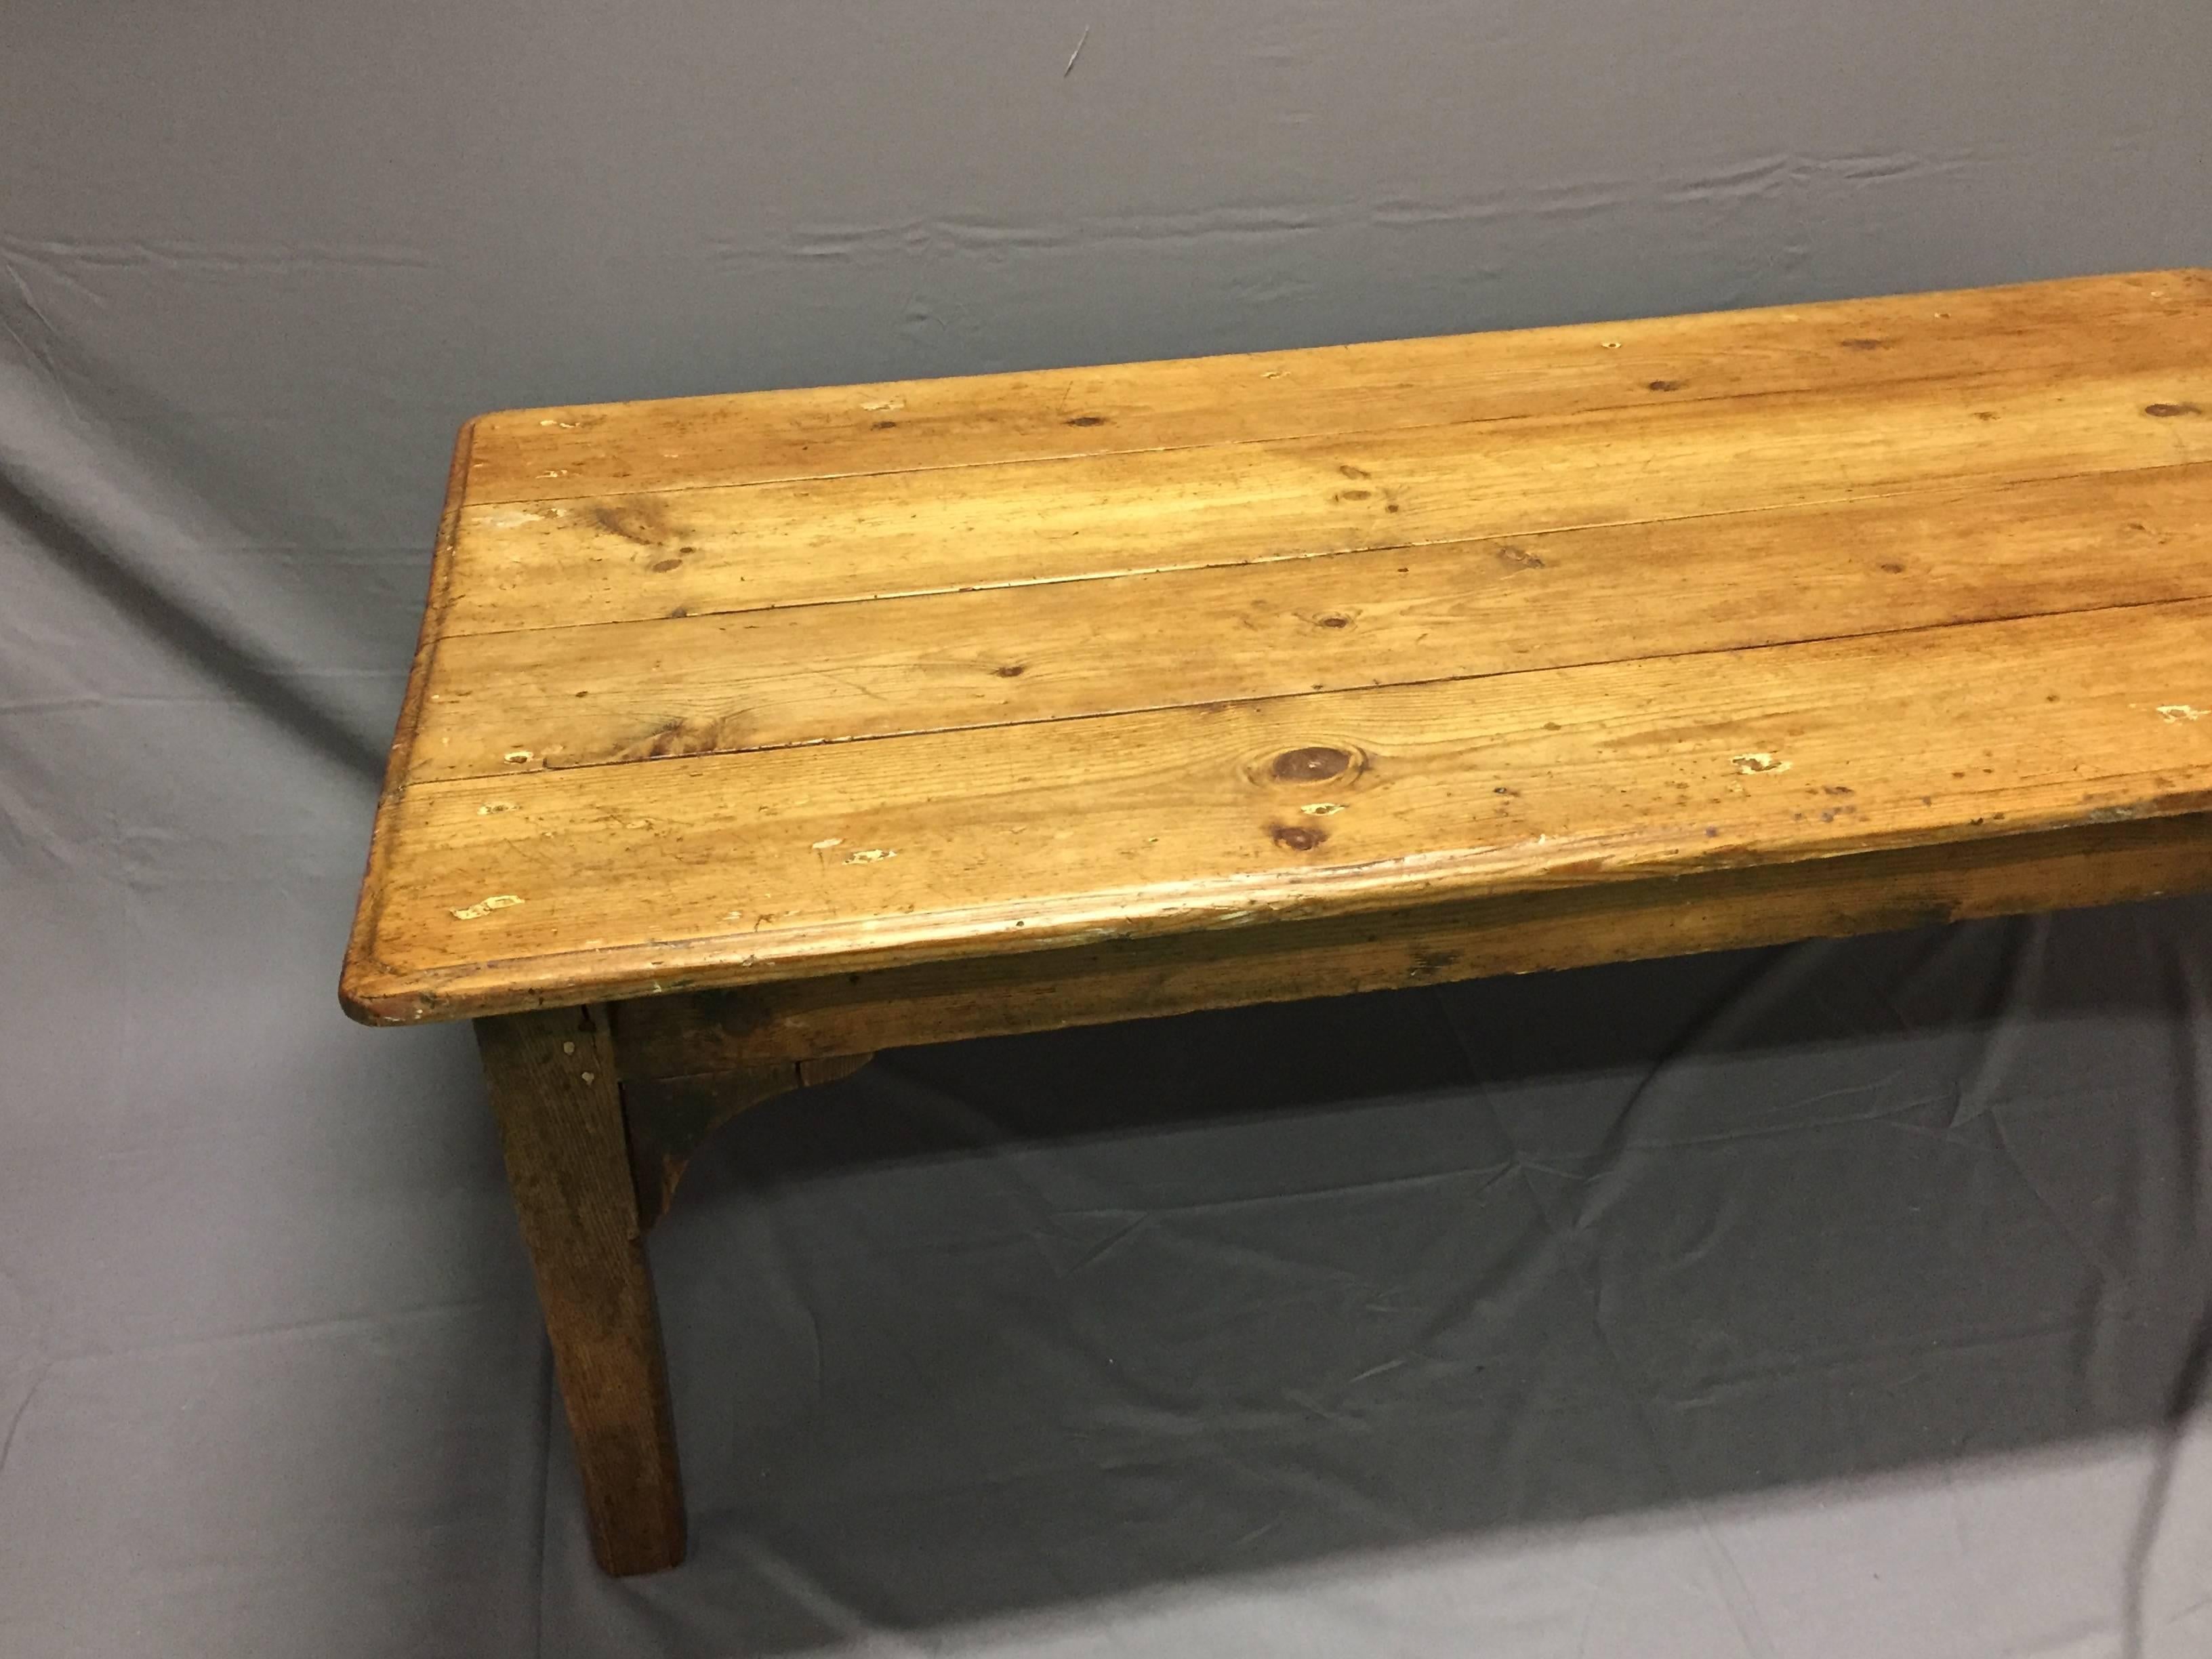 Lovely rustic pine coffee table with nice patine.